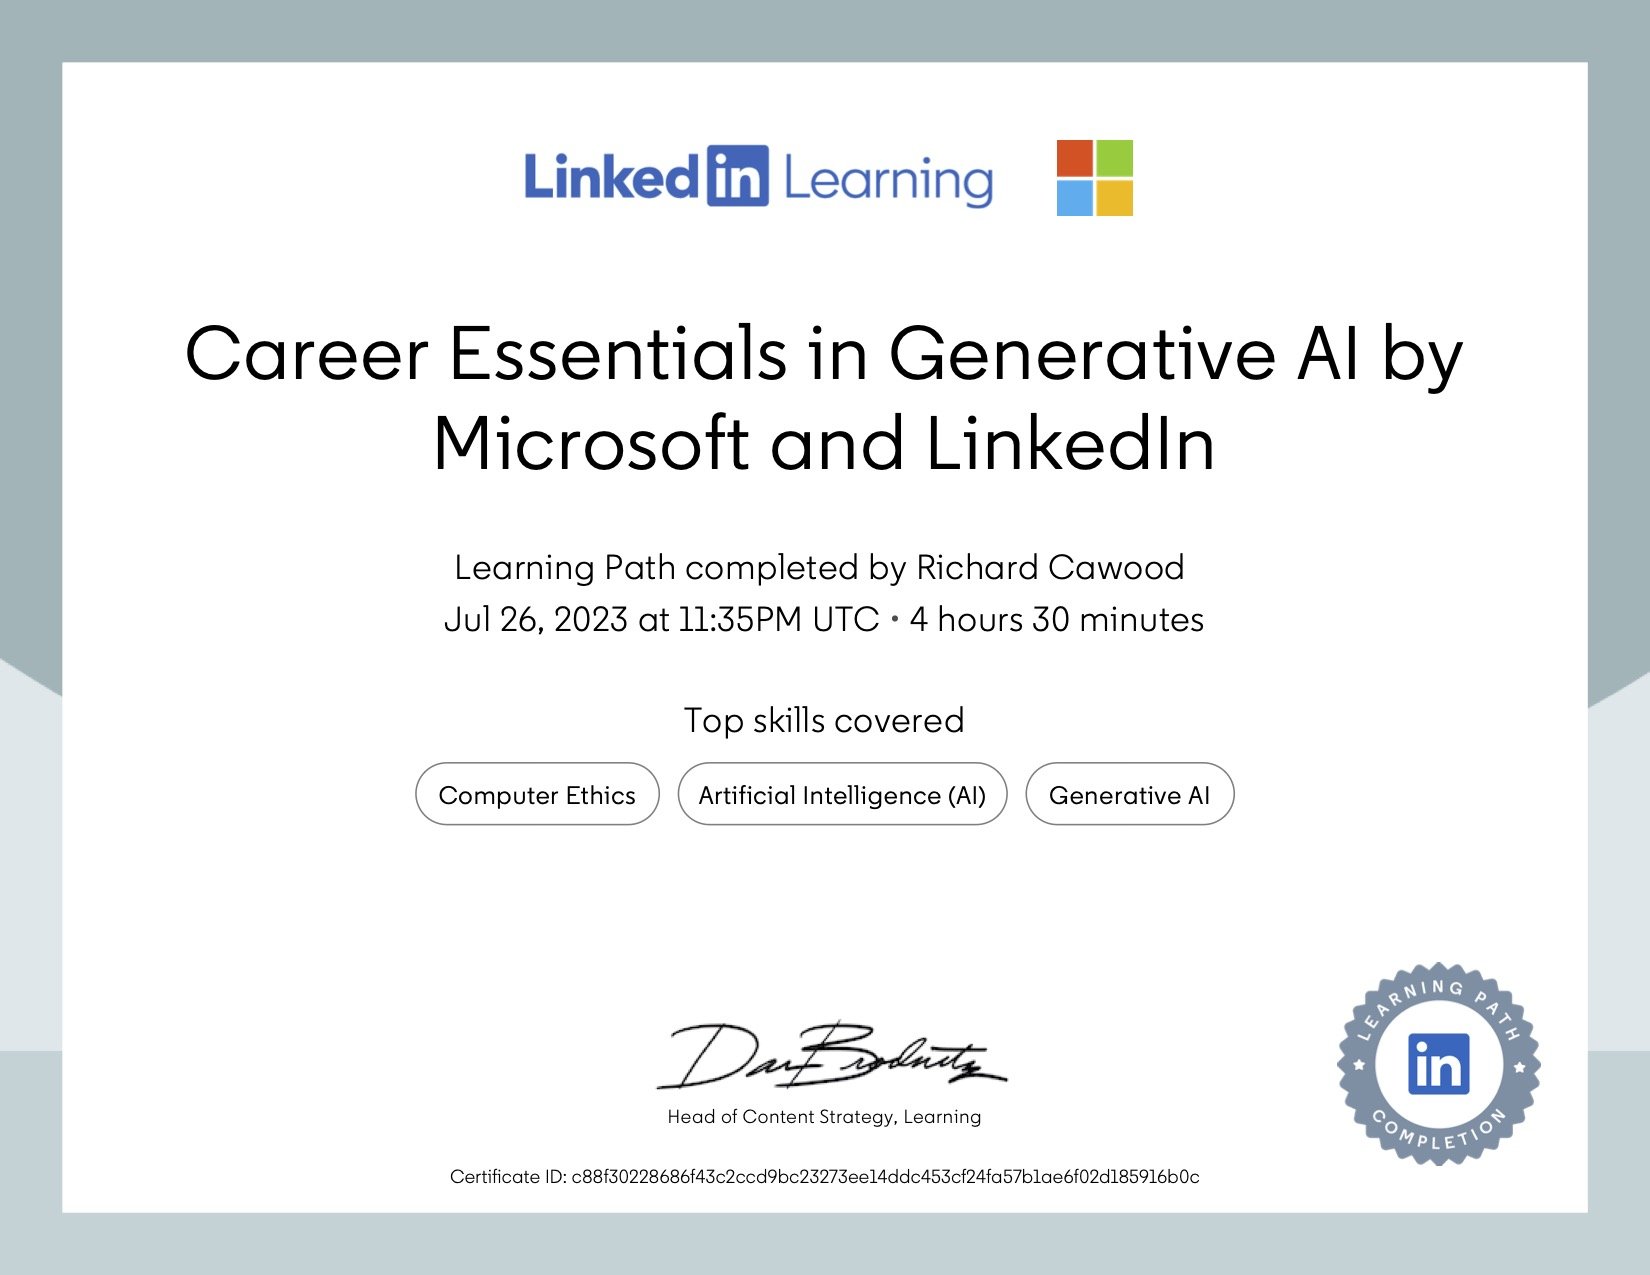 CertificateOfCompletion_Career Essentials in Generative AI by Microsoft and LinkedIn.jpg